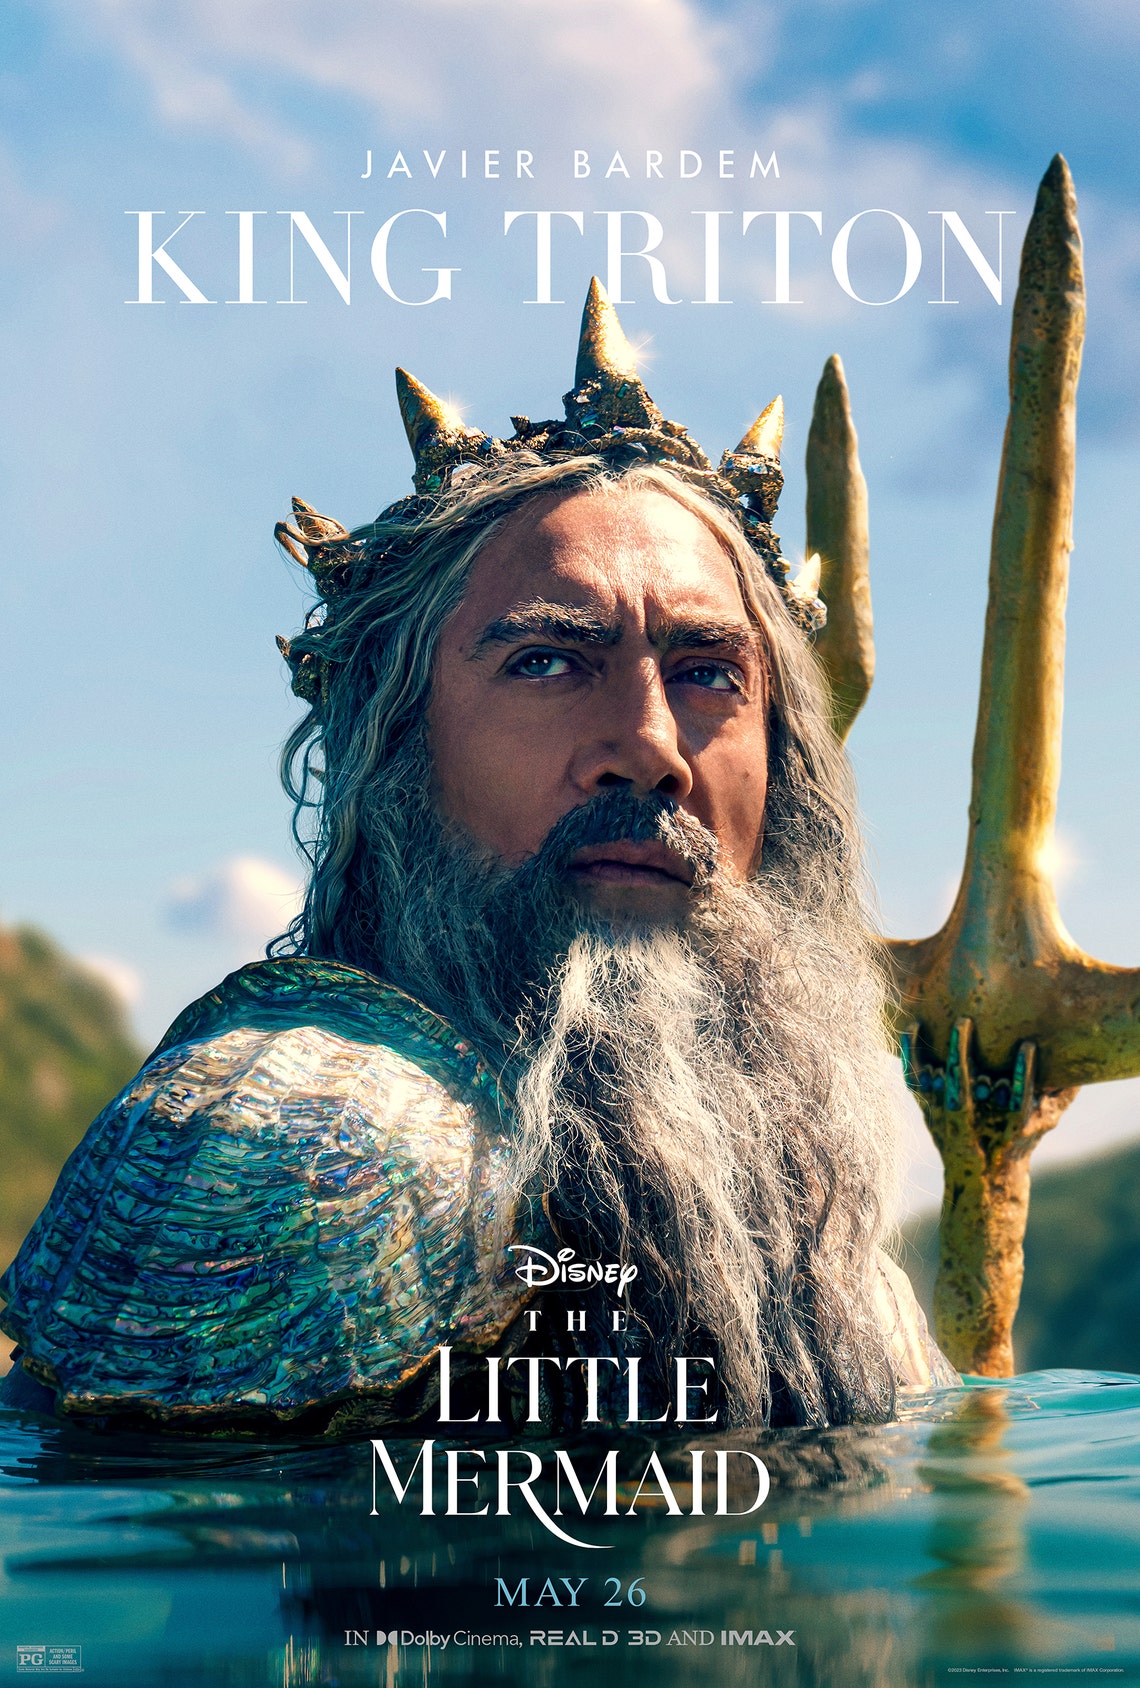 Disney Releases Character Posters for LiveAction The Little Mermaid